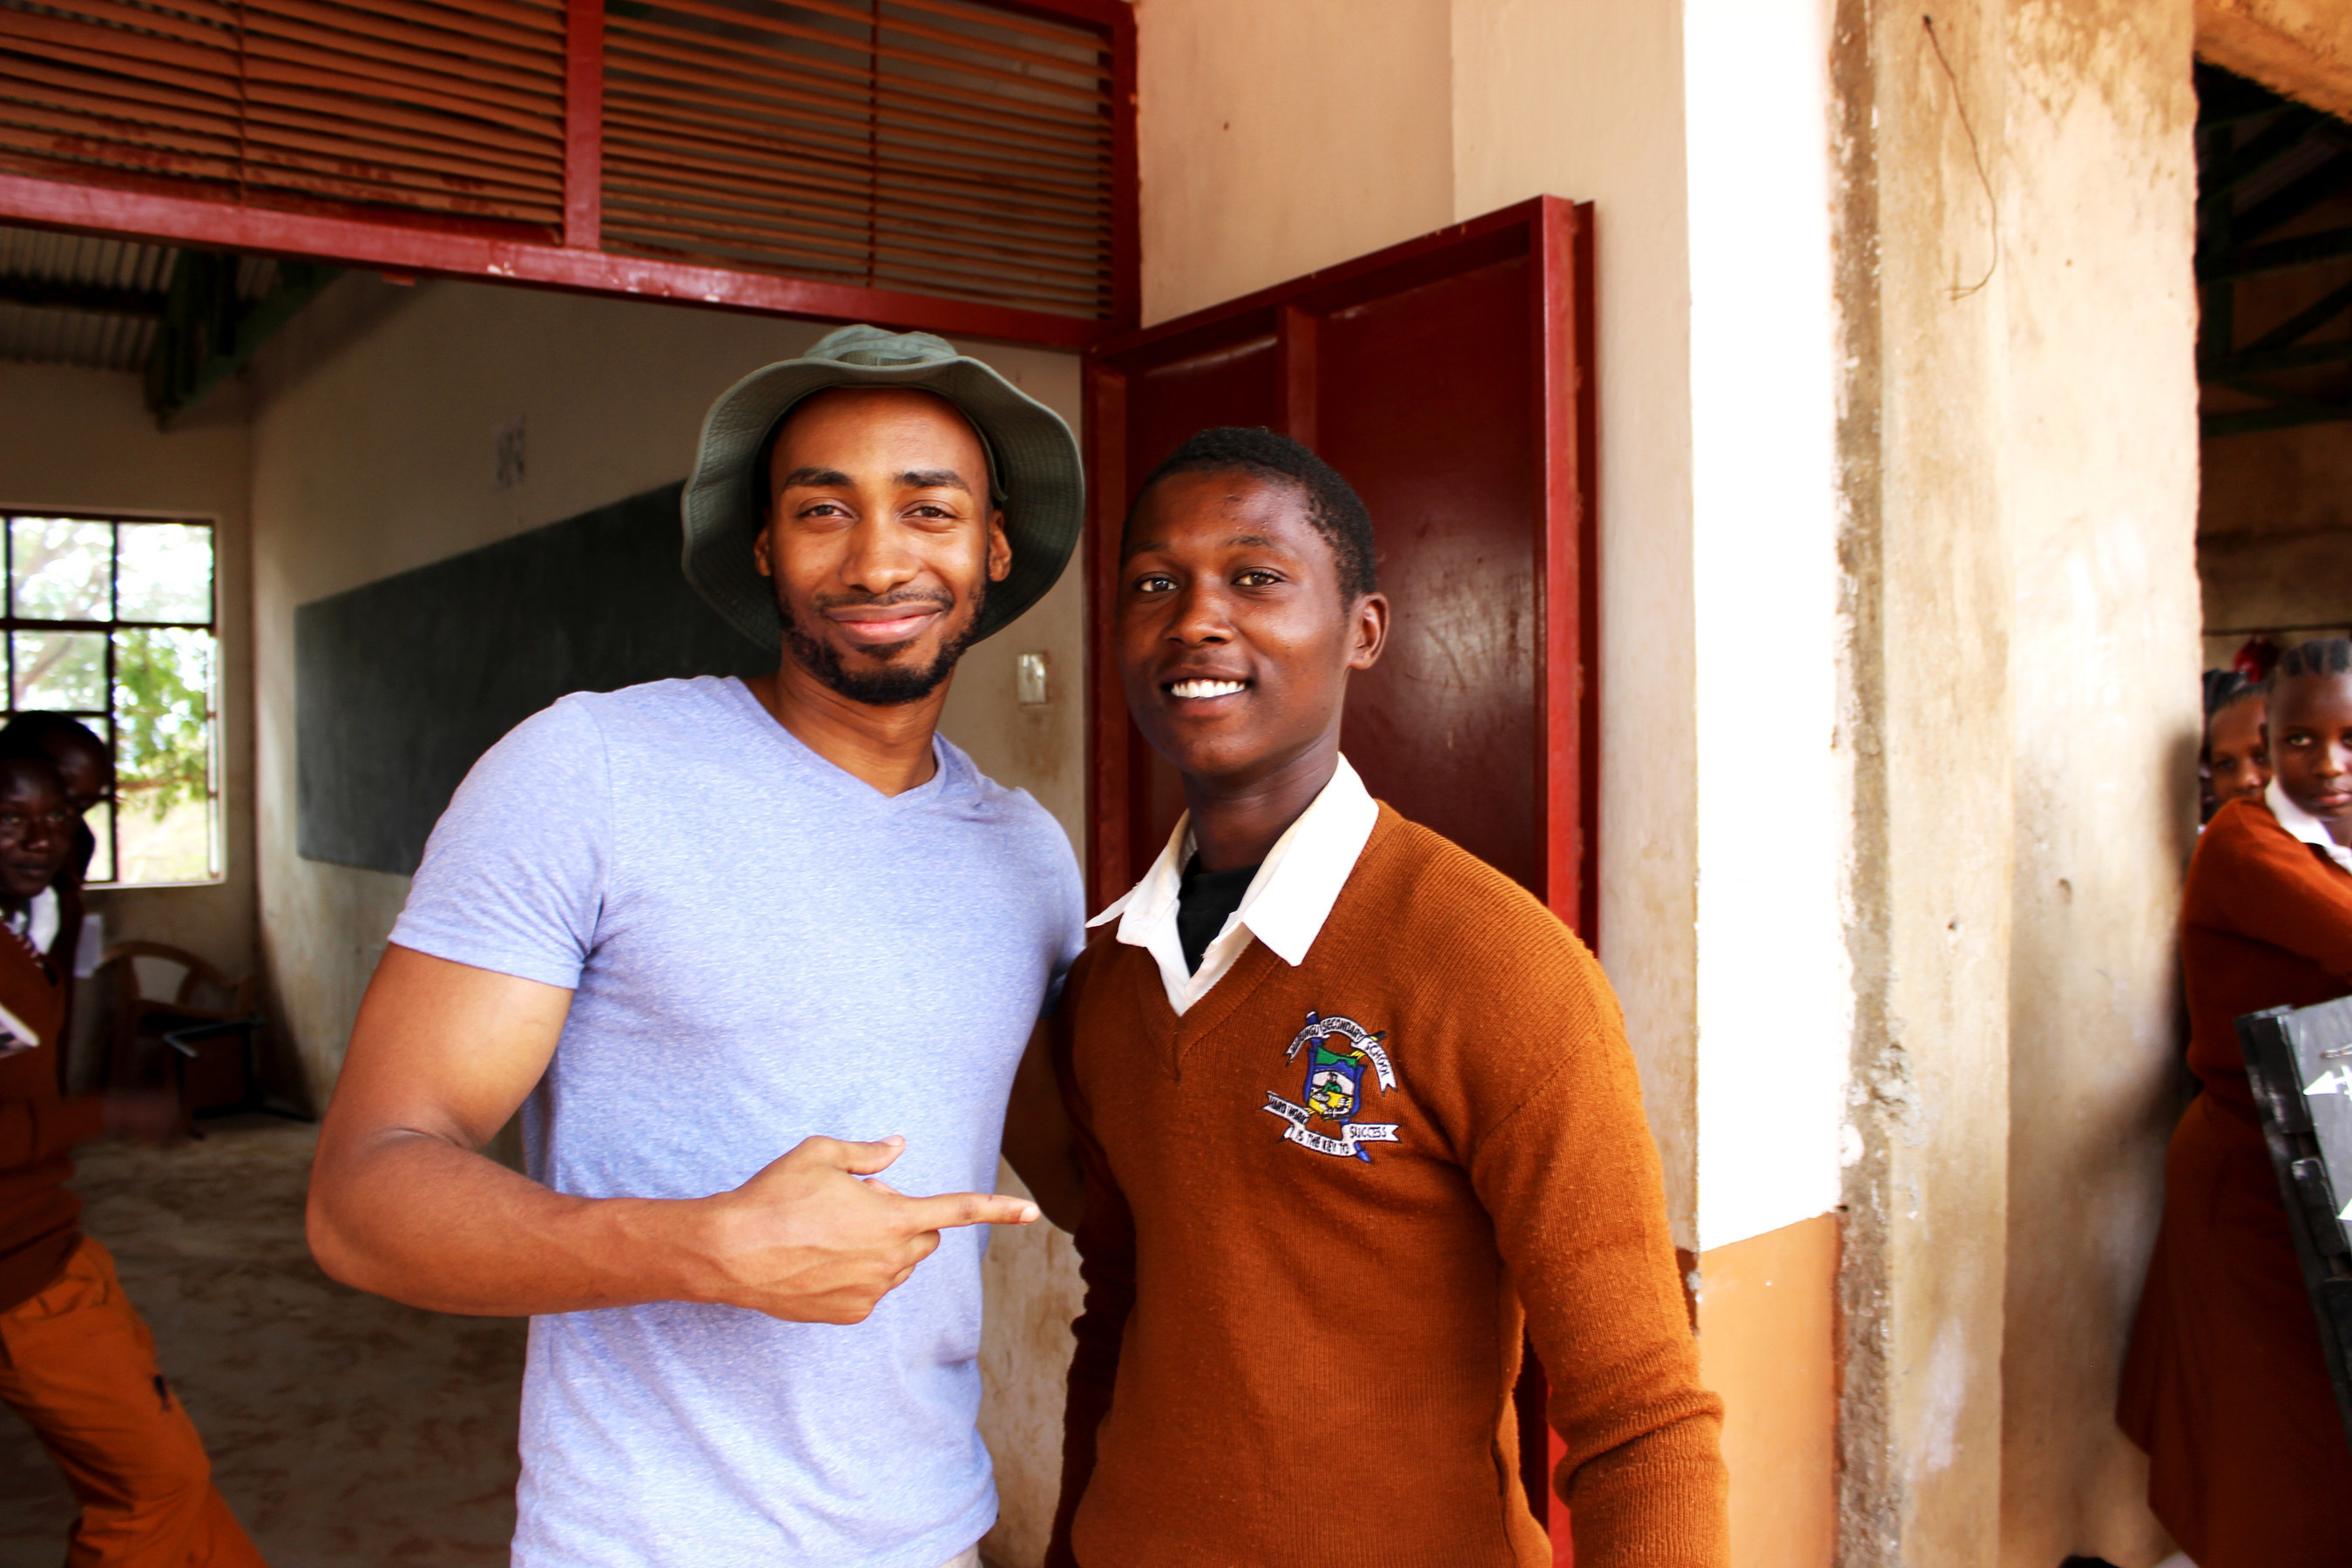 Prince Ea poses with a student of Marungu Secondary School near the Wildlife Works Kasigau Corridor REDD Project in Kenya. Prince Ea and the aspiring rapper each performed for the local classrooms.